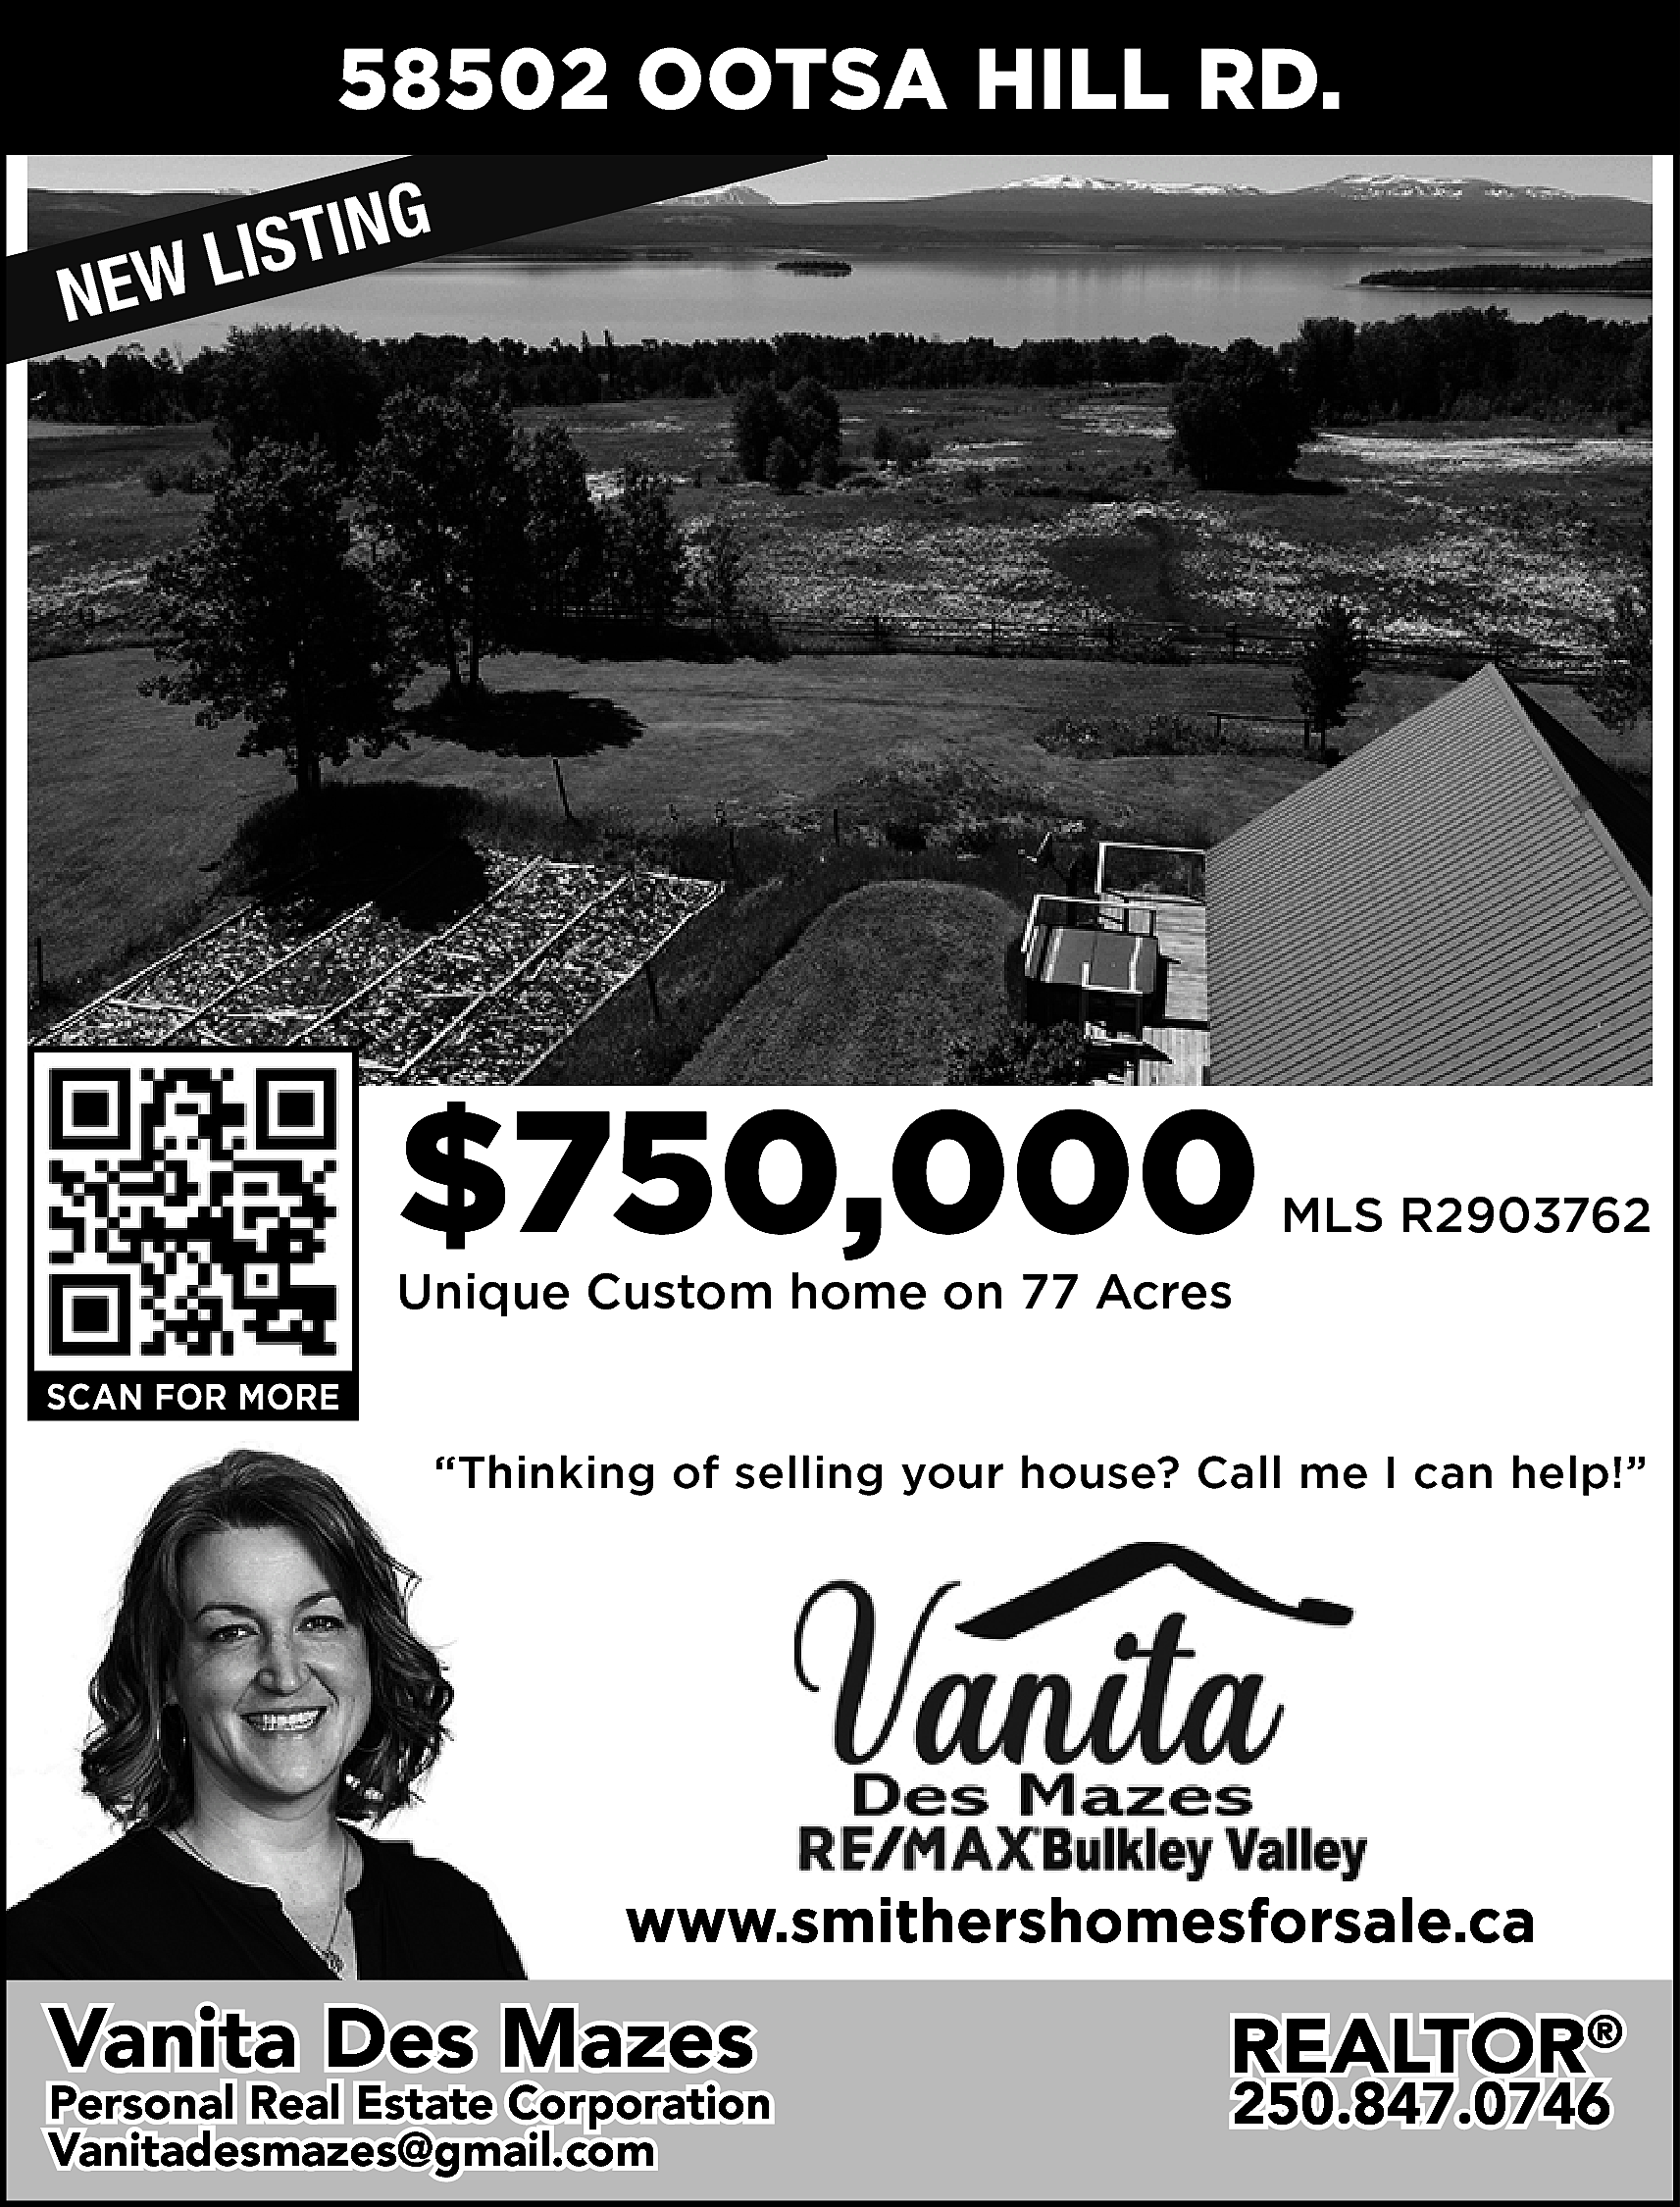 58502 OOTSA HILL RD. <br>G  58502 OOTSA HILL RD.  G  ISTIN  L  W  E  N    $750,000    MLS R2903762    Unique Custom home on 77 Acres  SCAN FOR MORE    “Thinking of selling your house? Call me I can help!”    www.smithershomesforsale.ca    Vanita Des Mazes    Personal Real Estate Corporation  Vanitadesmazes@gmail.com  vanitadesmazes@gmail.com    REALTOR®  250.847.0746    